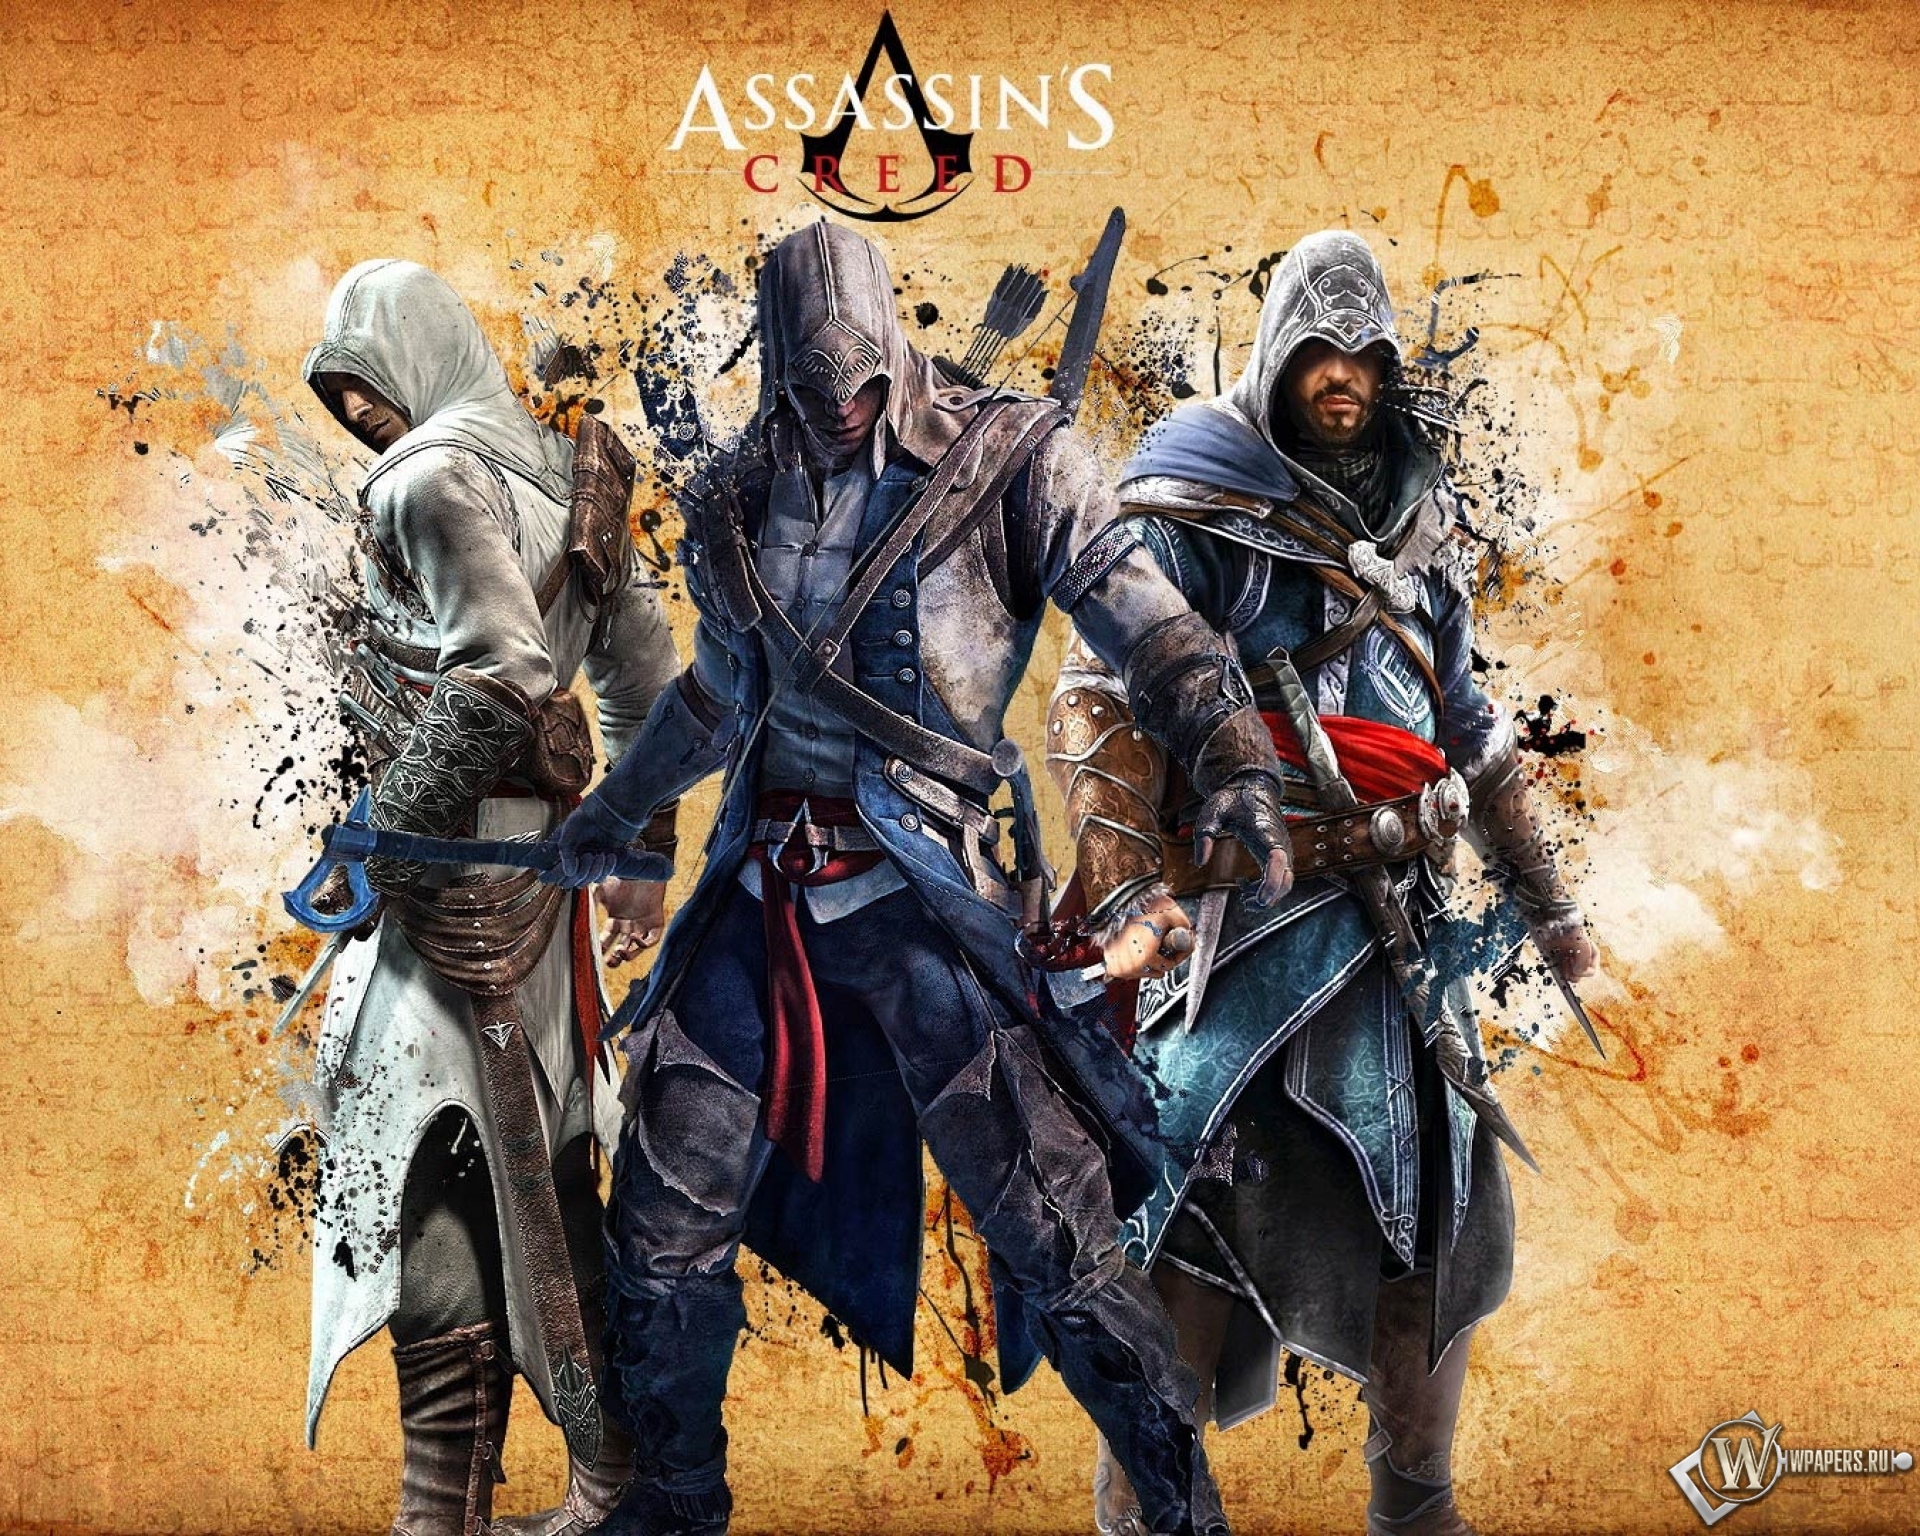 http://wpapers.ru/wallpapers/games/Assassins-creed/15927/download/1920x1536_Assassins-creed.jpg